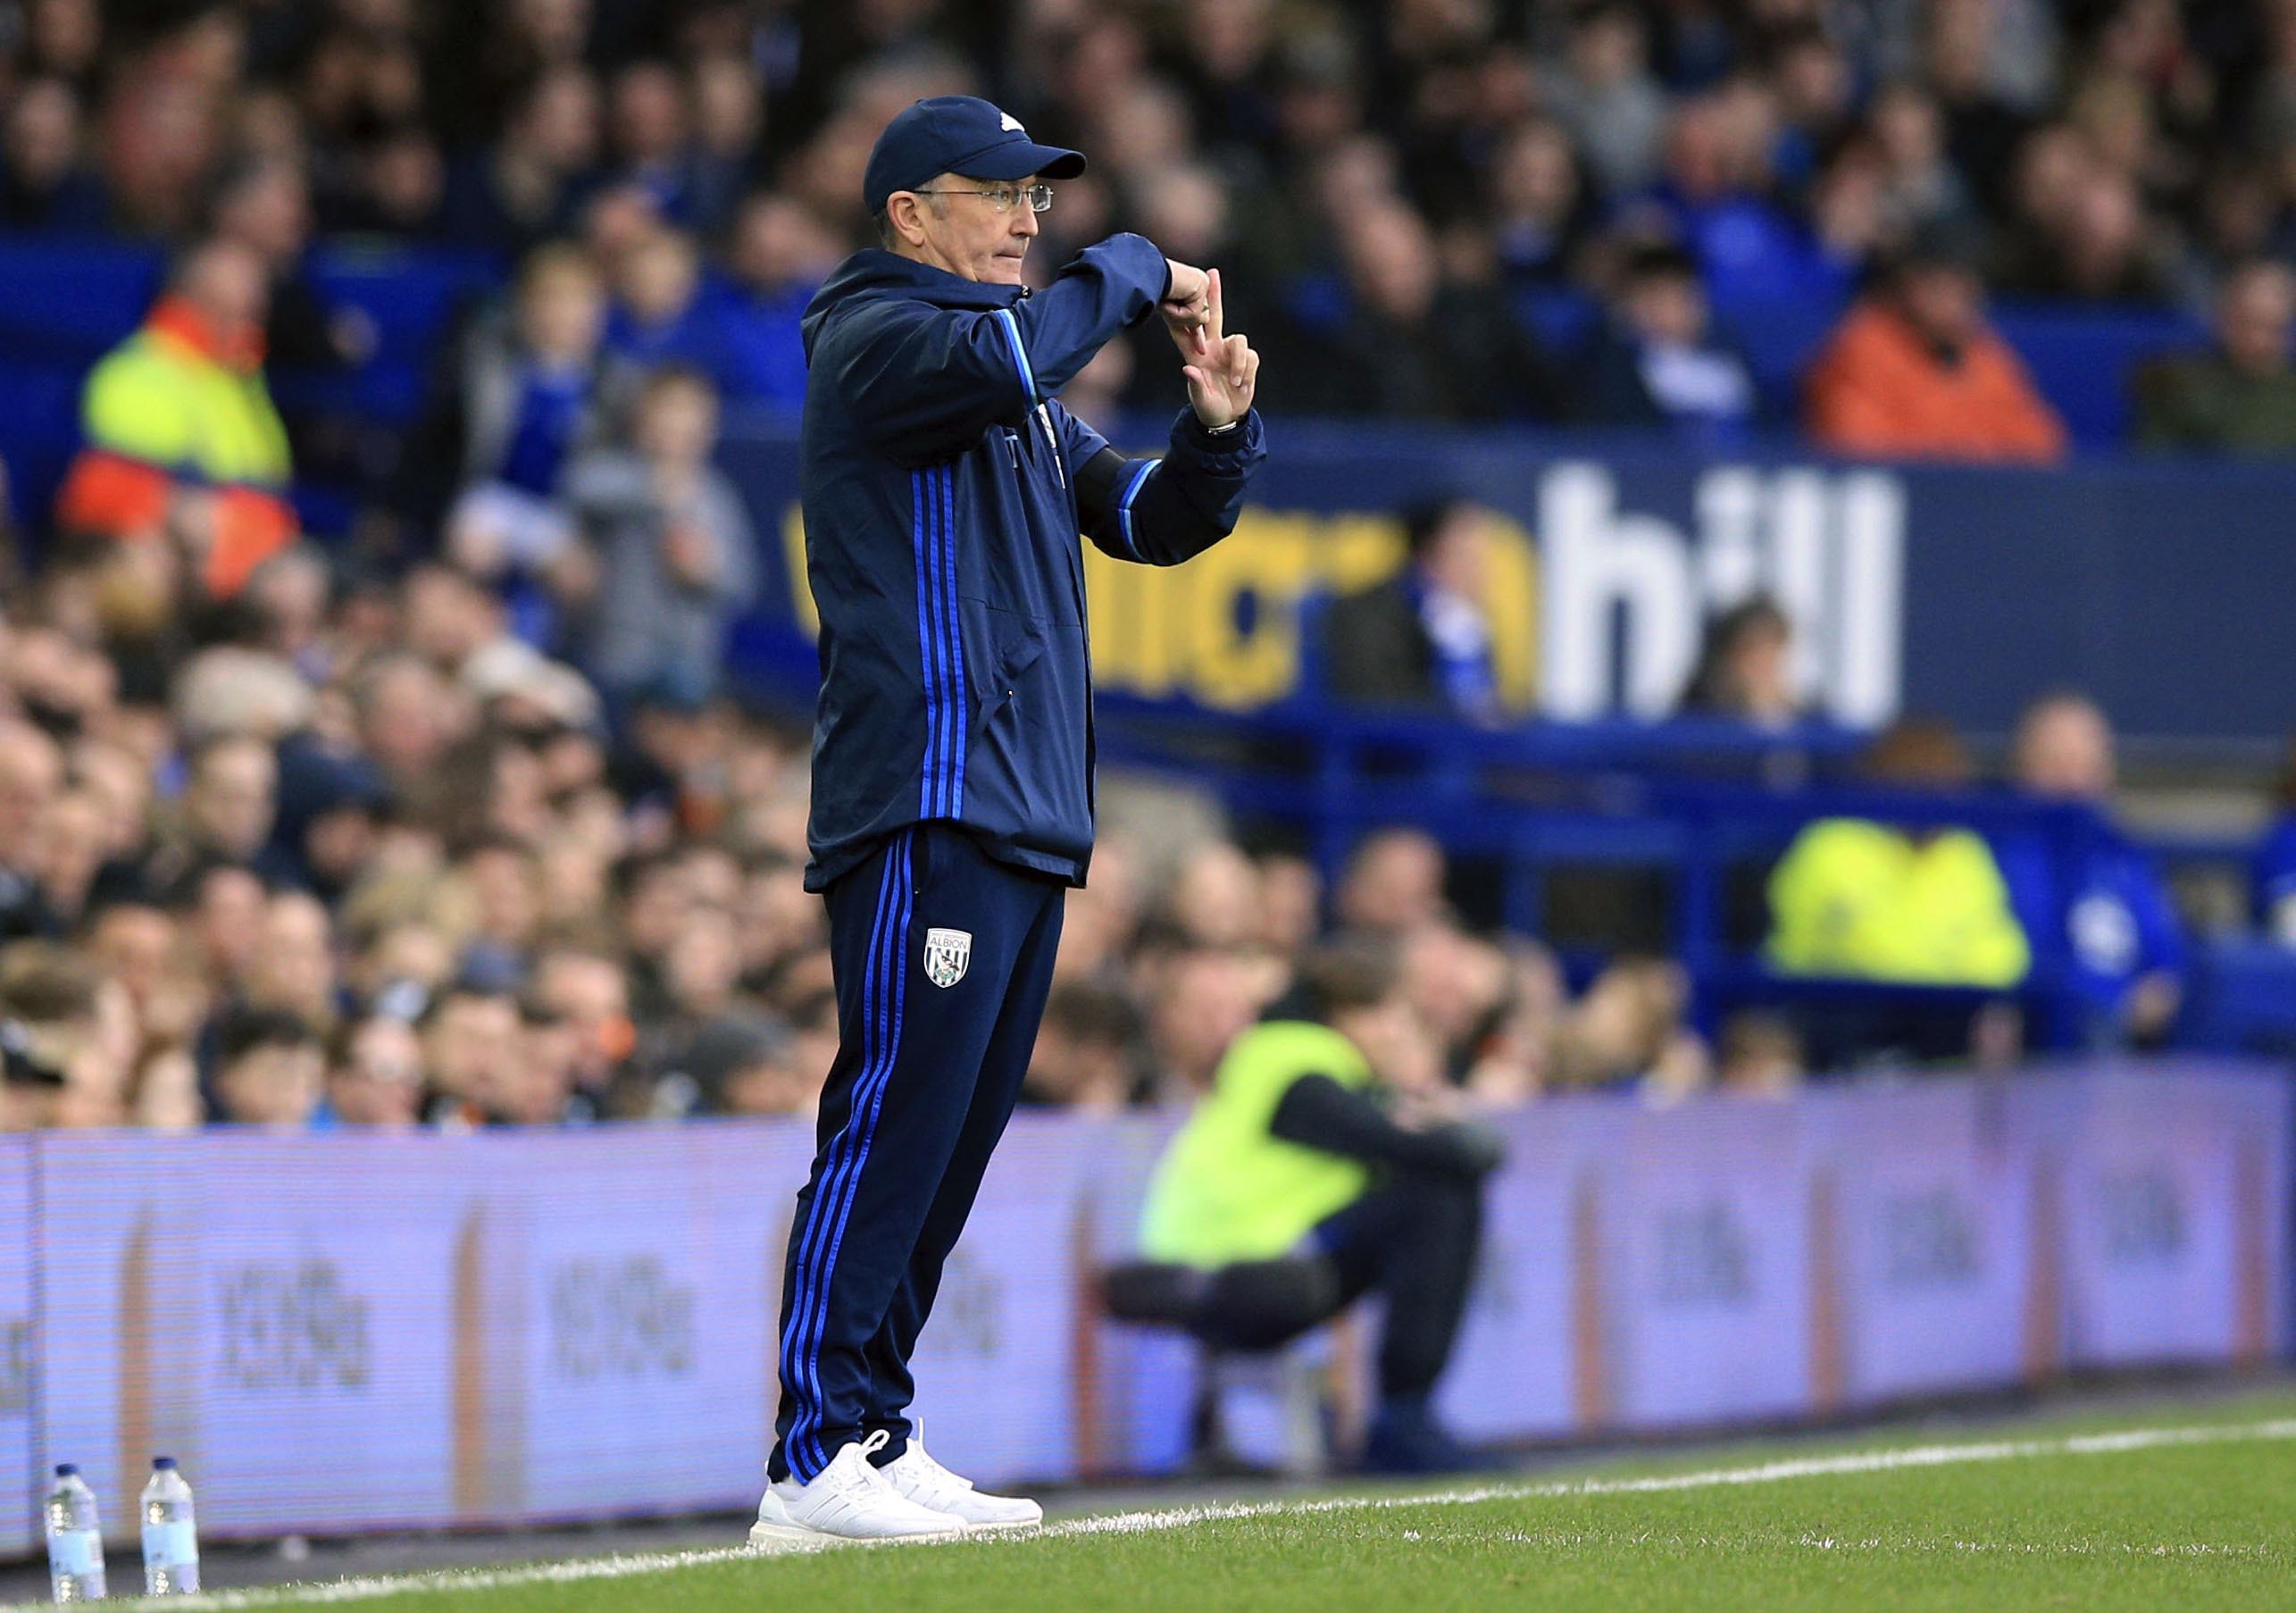 West Bromwich Albion manager Tony Pulis gestures on the touchline during the English Premier League soccer match against Everton at Goodison Park, Liverpool, England, on Saturday March 11, 2017. Photo: AP